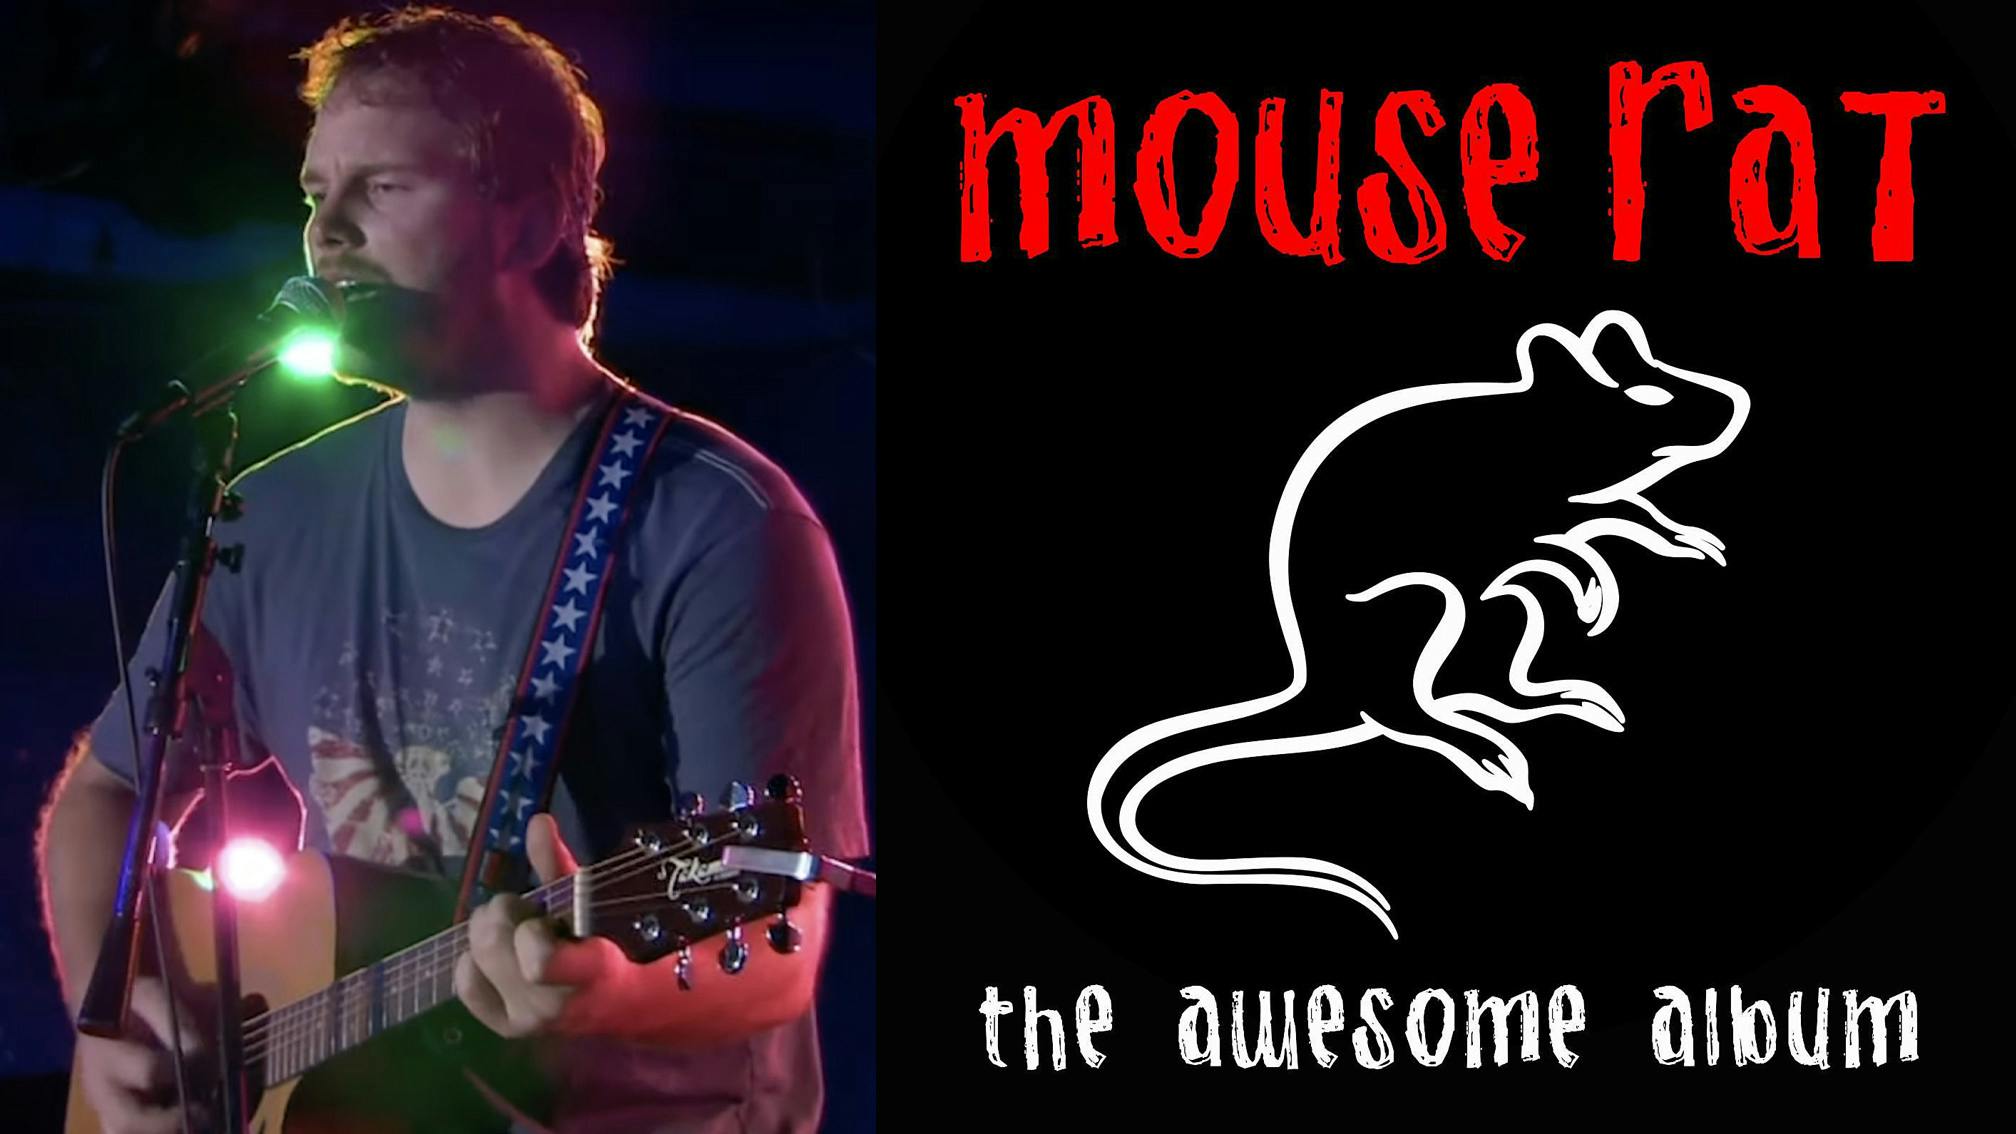 Chris Pratt’s Parks And Recreation band Mouse Rat to release The Awesome Album